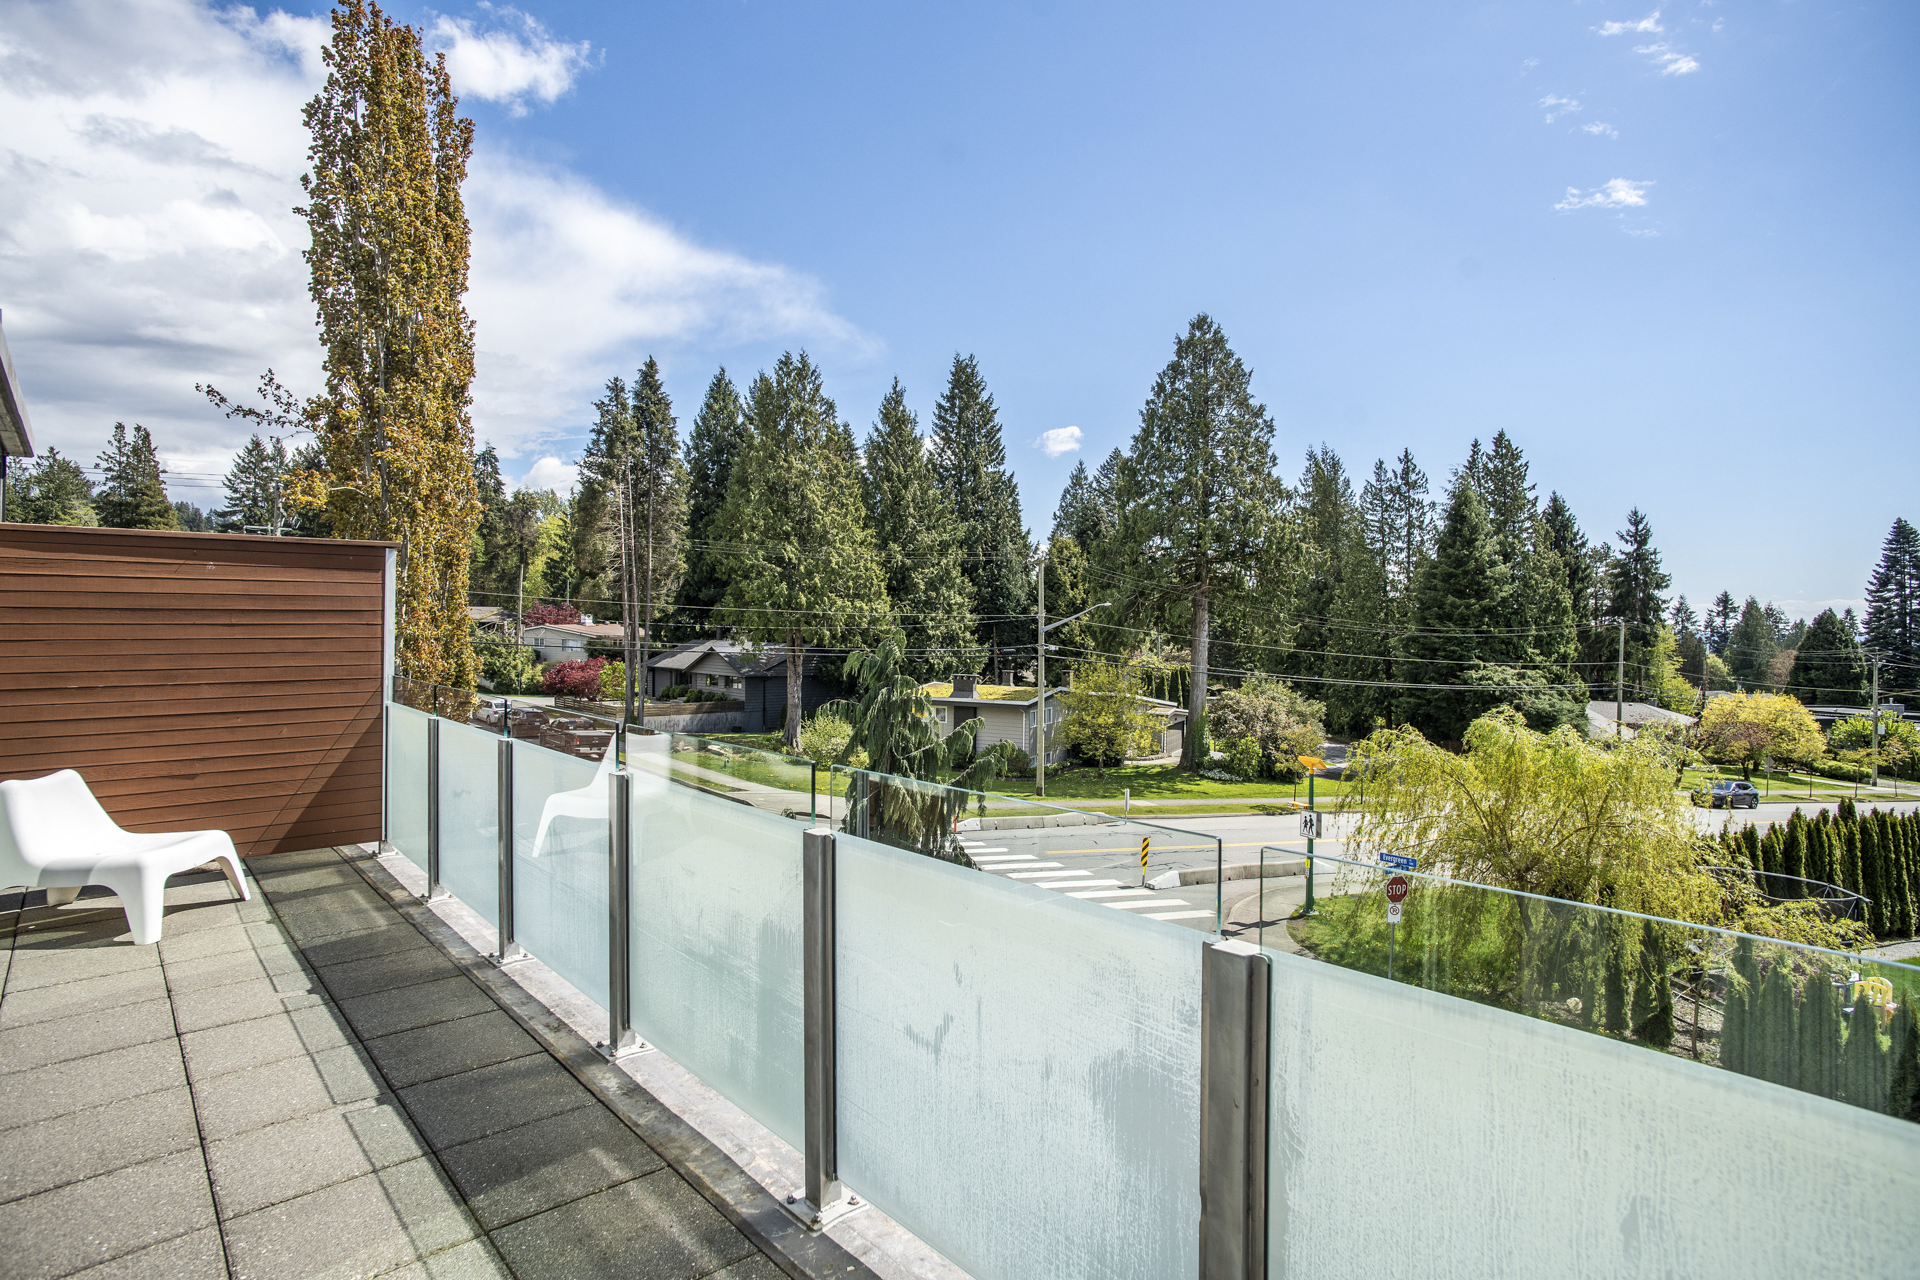 303 650 Evergreen Place, North Vancouver - For sale by Rossetti Realty - photo 6